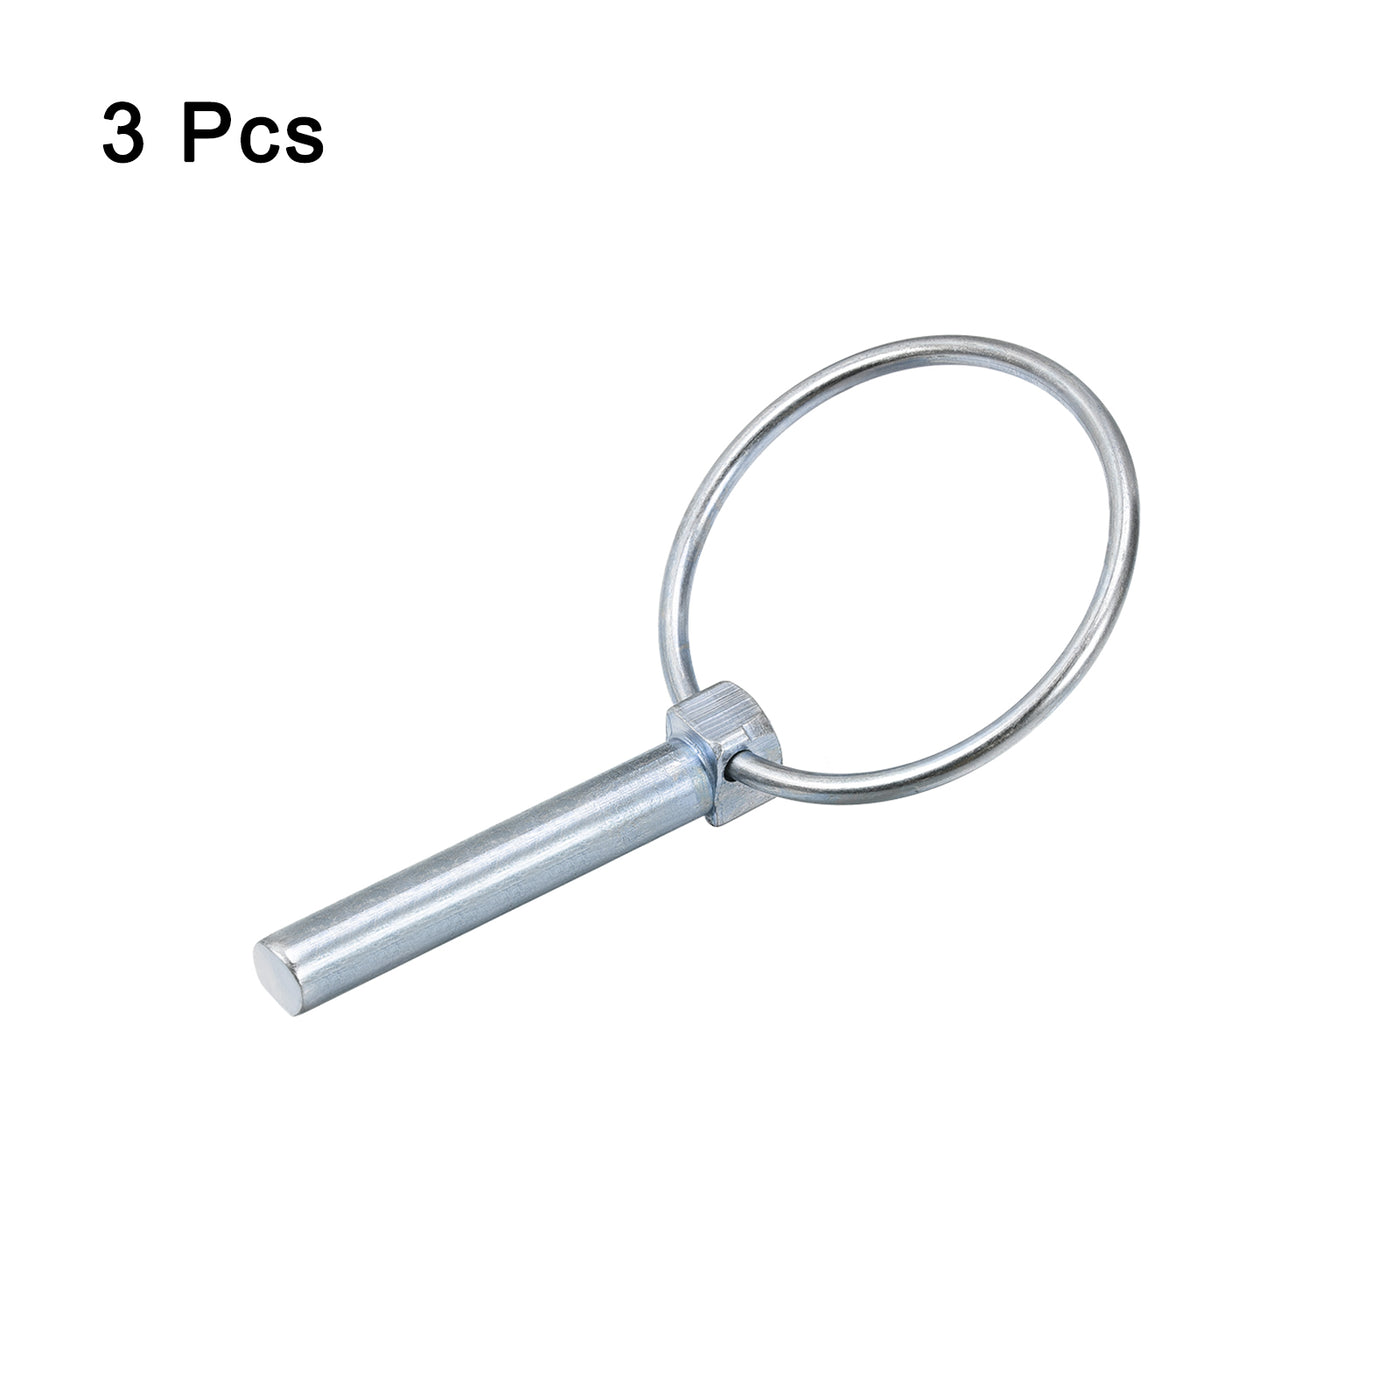 uxcell Uxcell 3Pcs 1/2" x 2-3/4" Linch Pin with Ring for Boat Kayak Canoe